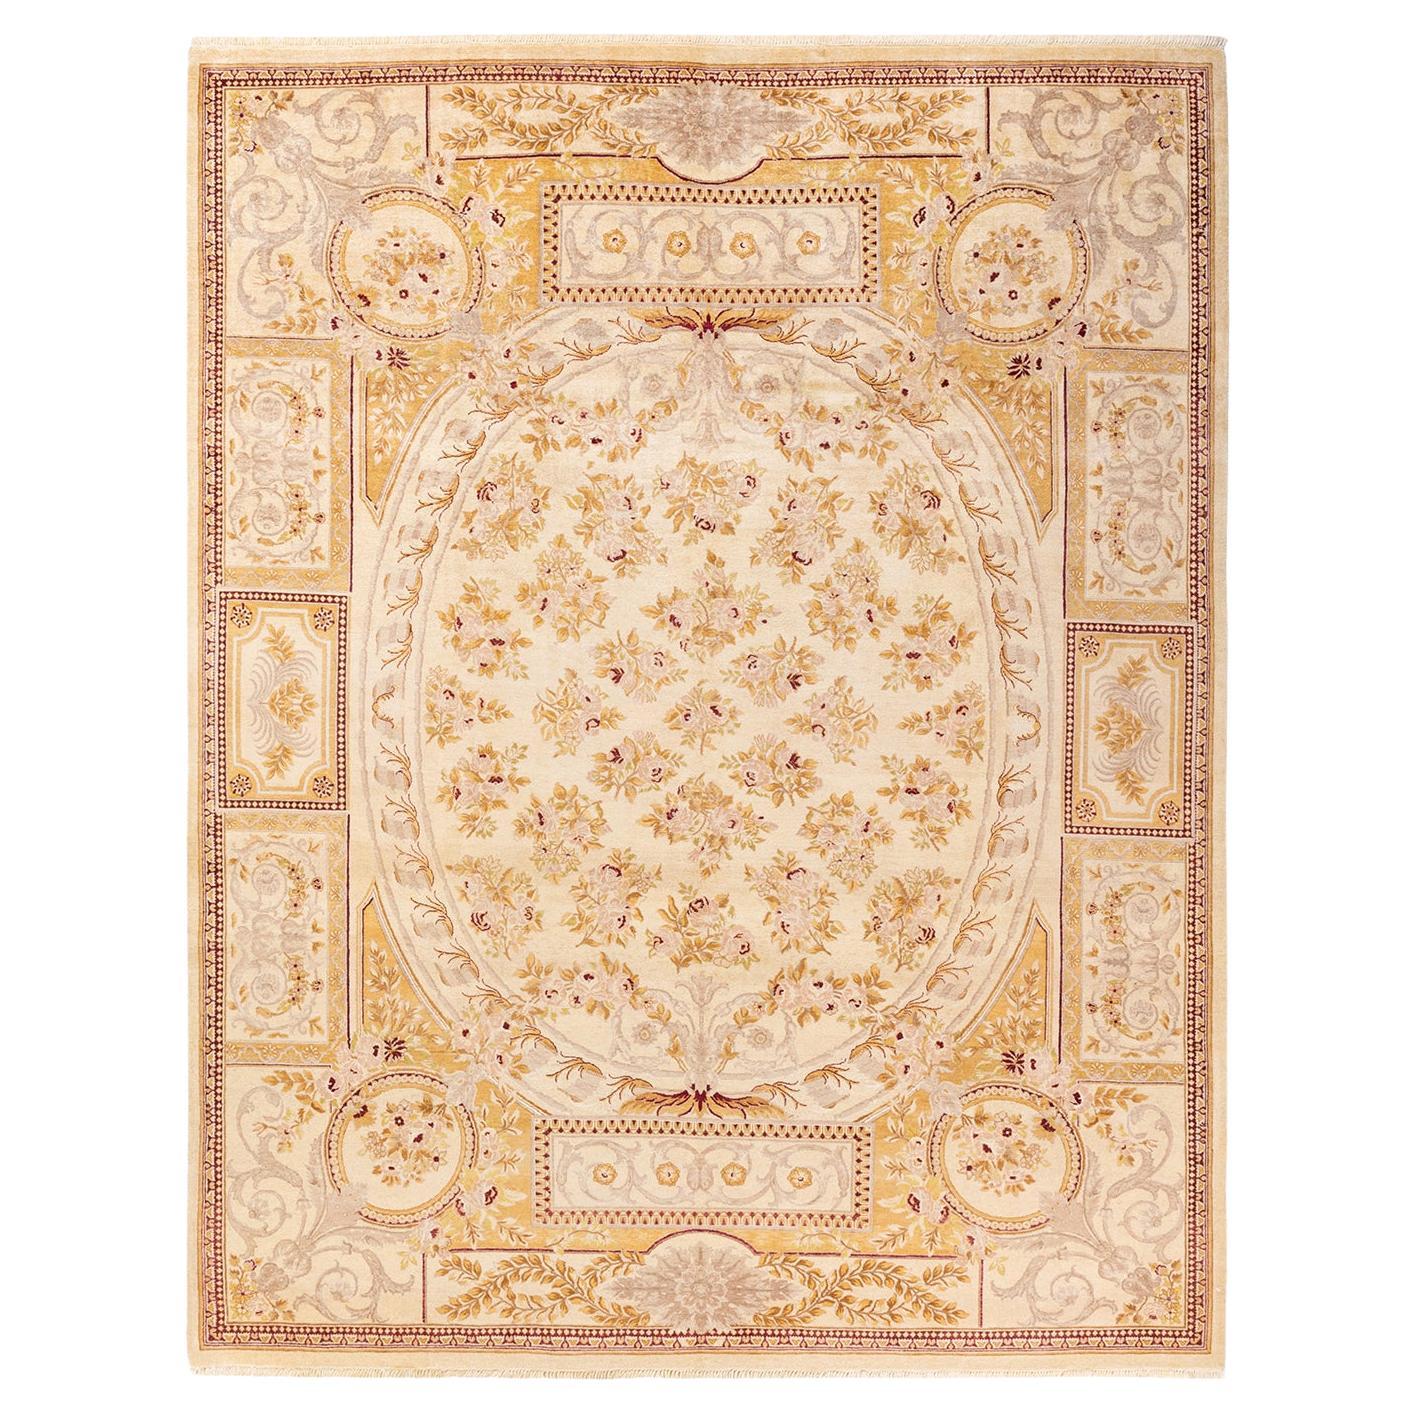 One-of-a-kind Hand Knotted Floral Mogul Ivory Area Rug